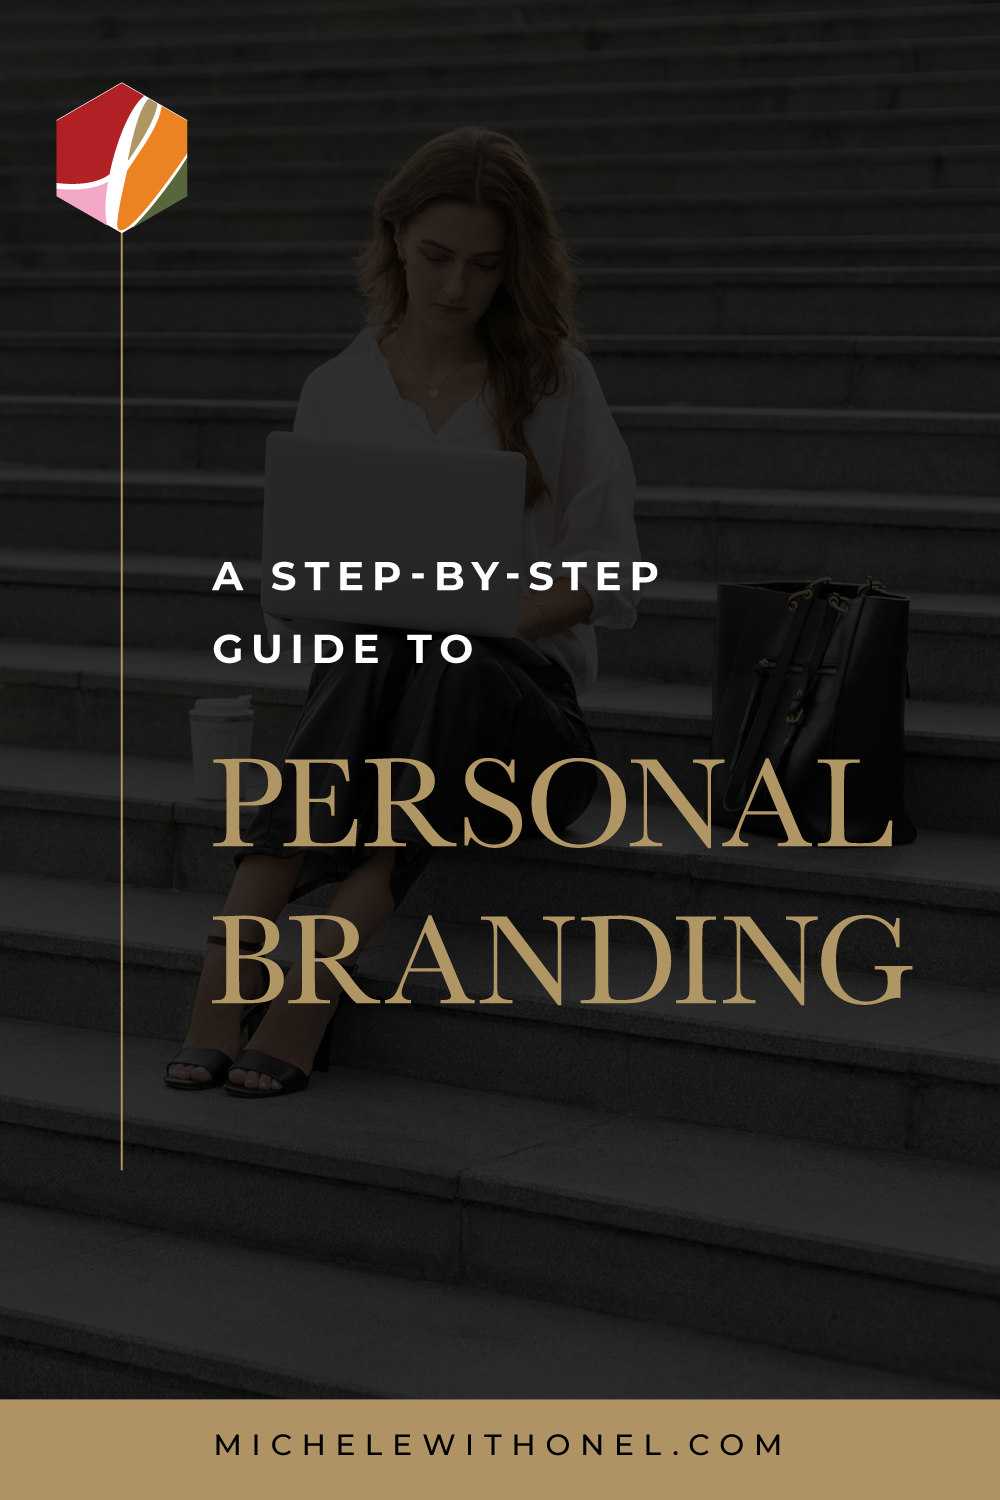 Looking for some personal branding ideas? This post is for you! Discover what personal branding is and why you need it—including tips on how to build a personal brand, why it’s important for marketing, and the power behind brand photography. #branding #entrepreneur #marketing #business